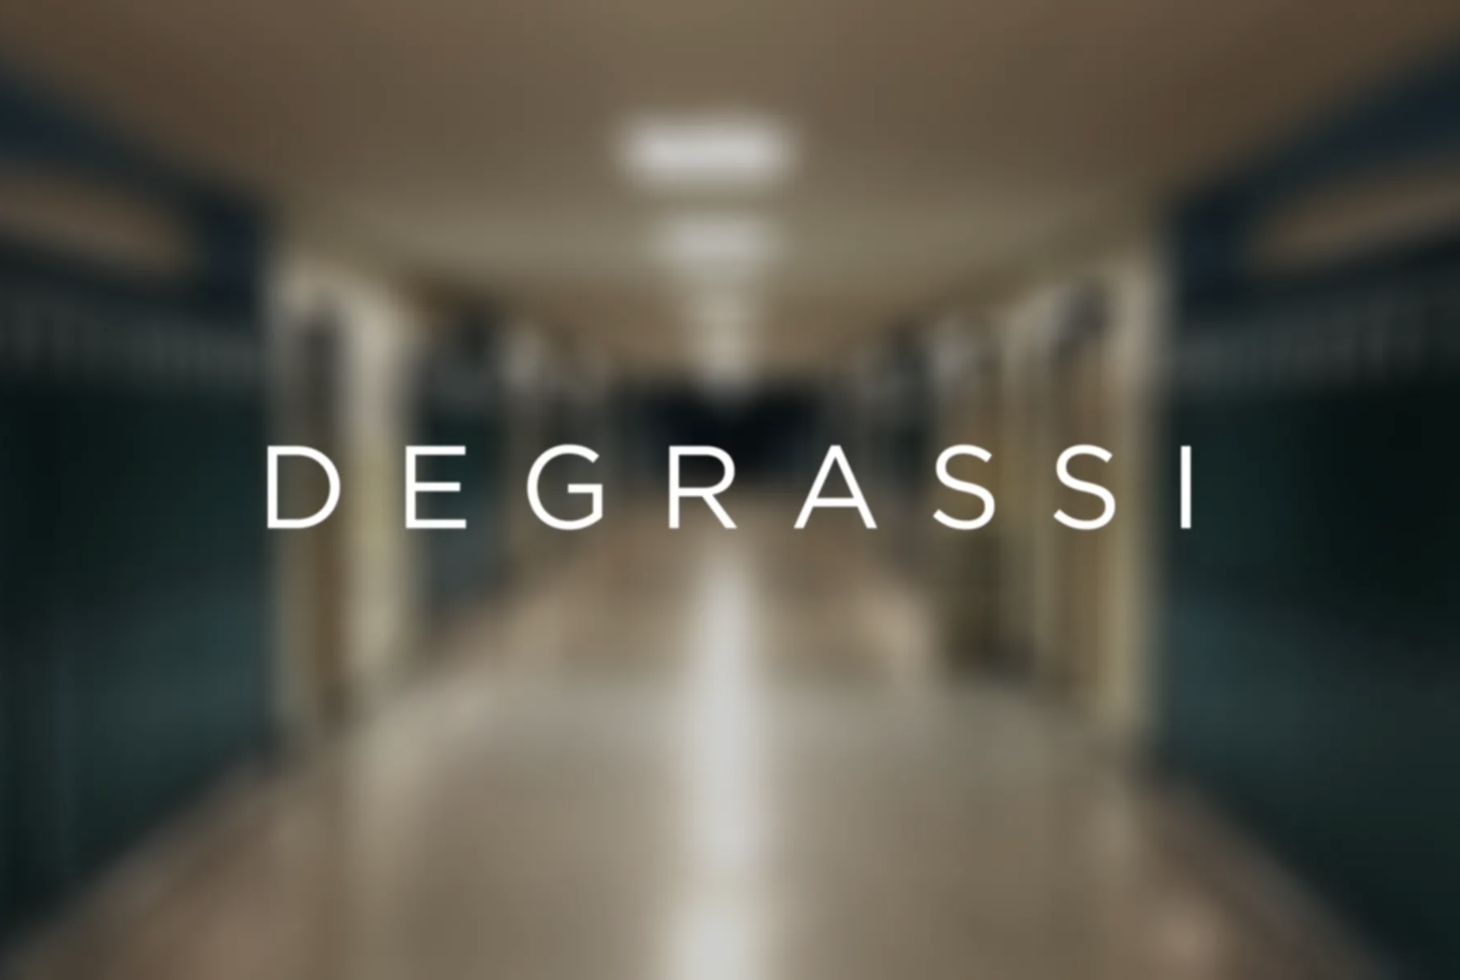 Degrassi Is Coming Back With A New Series on HBO Max Next Year